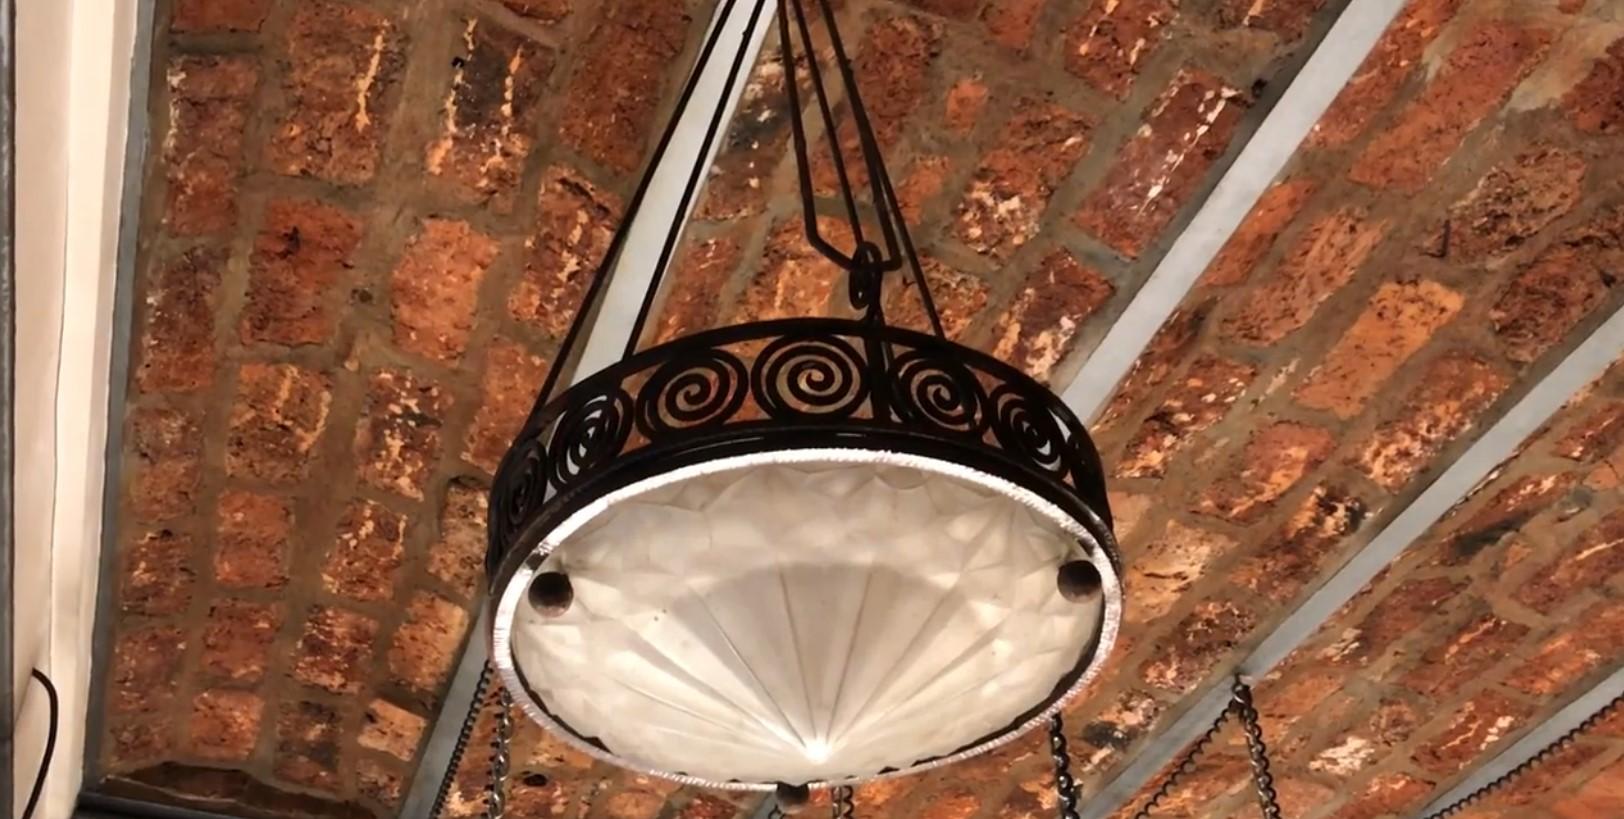 Hanging lamp Schneider

Material: art glass and Iron
Style: Art Nouveau
Country: French
To take care of your property and the lives of our customers, the new wiring has been done.
If you are looking for sconces to match your ceiling lighting, we